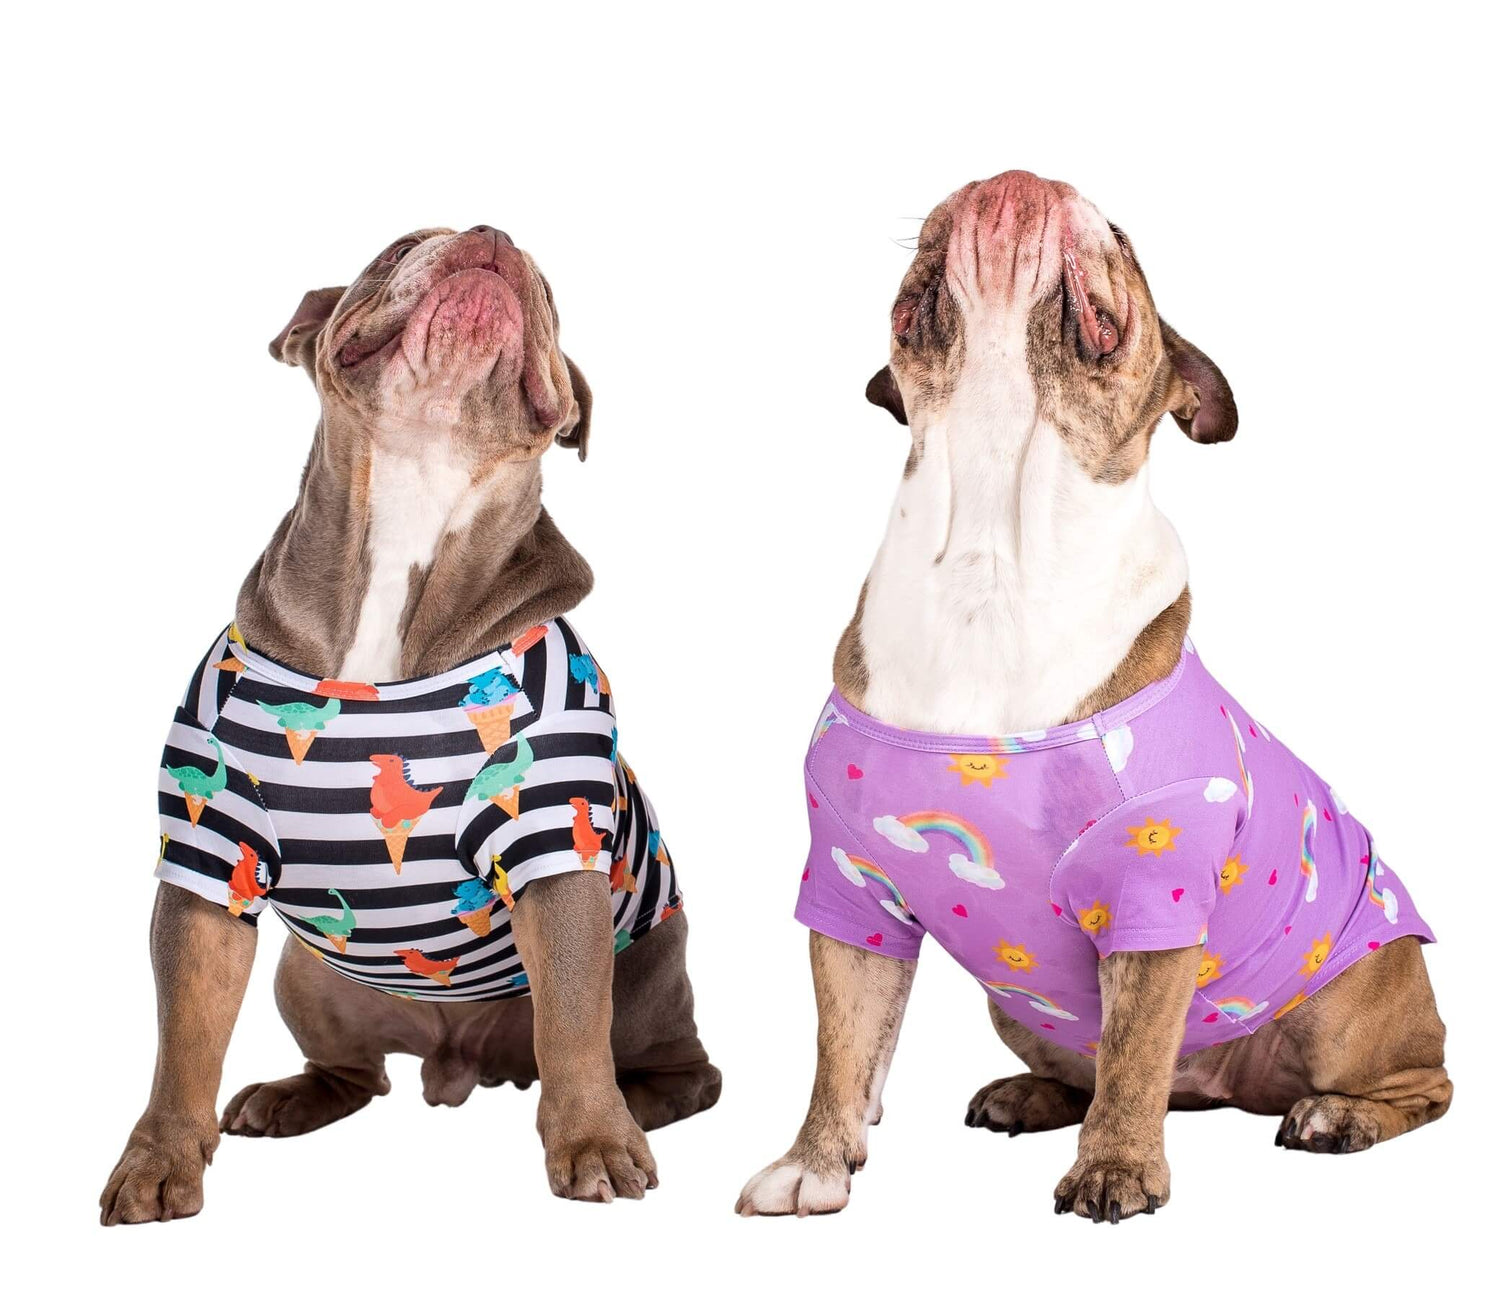 Two English bulldogs wearing dog clothing made by Vibrant Hound. One is a black and white stripped shirt swith dinosaurs printed on it, and the other dog shirt is purple with rainbows, clouds, and suns printed on it.